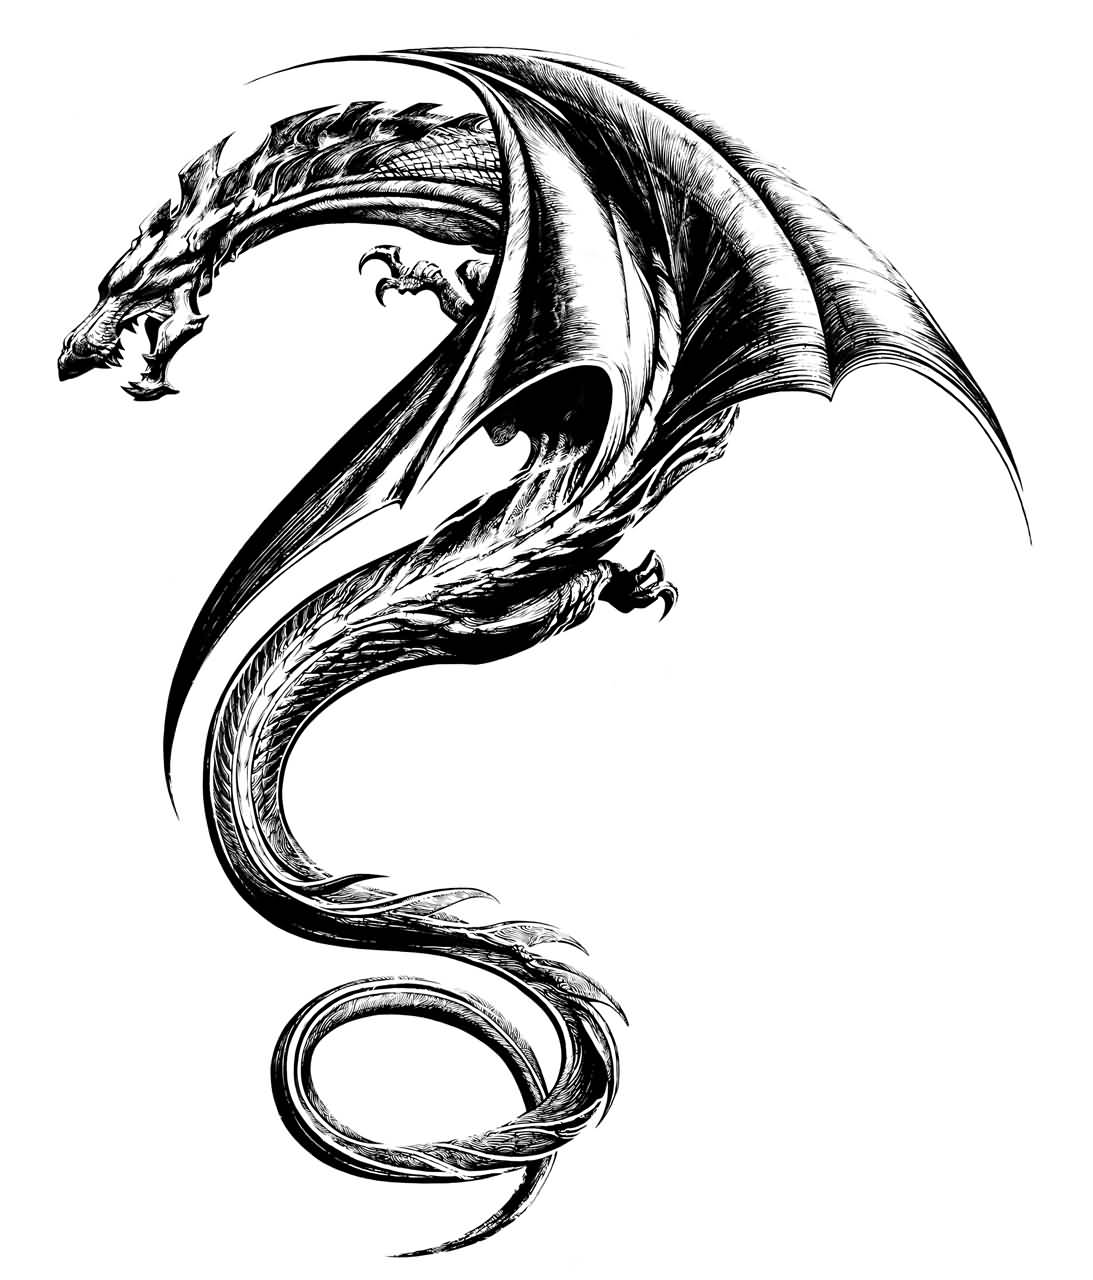 Awesome Flying Dragon Tattoo Design